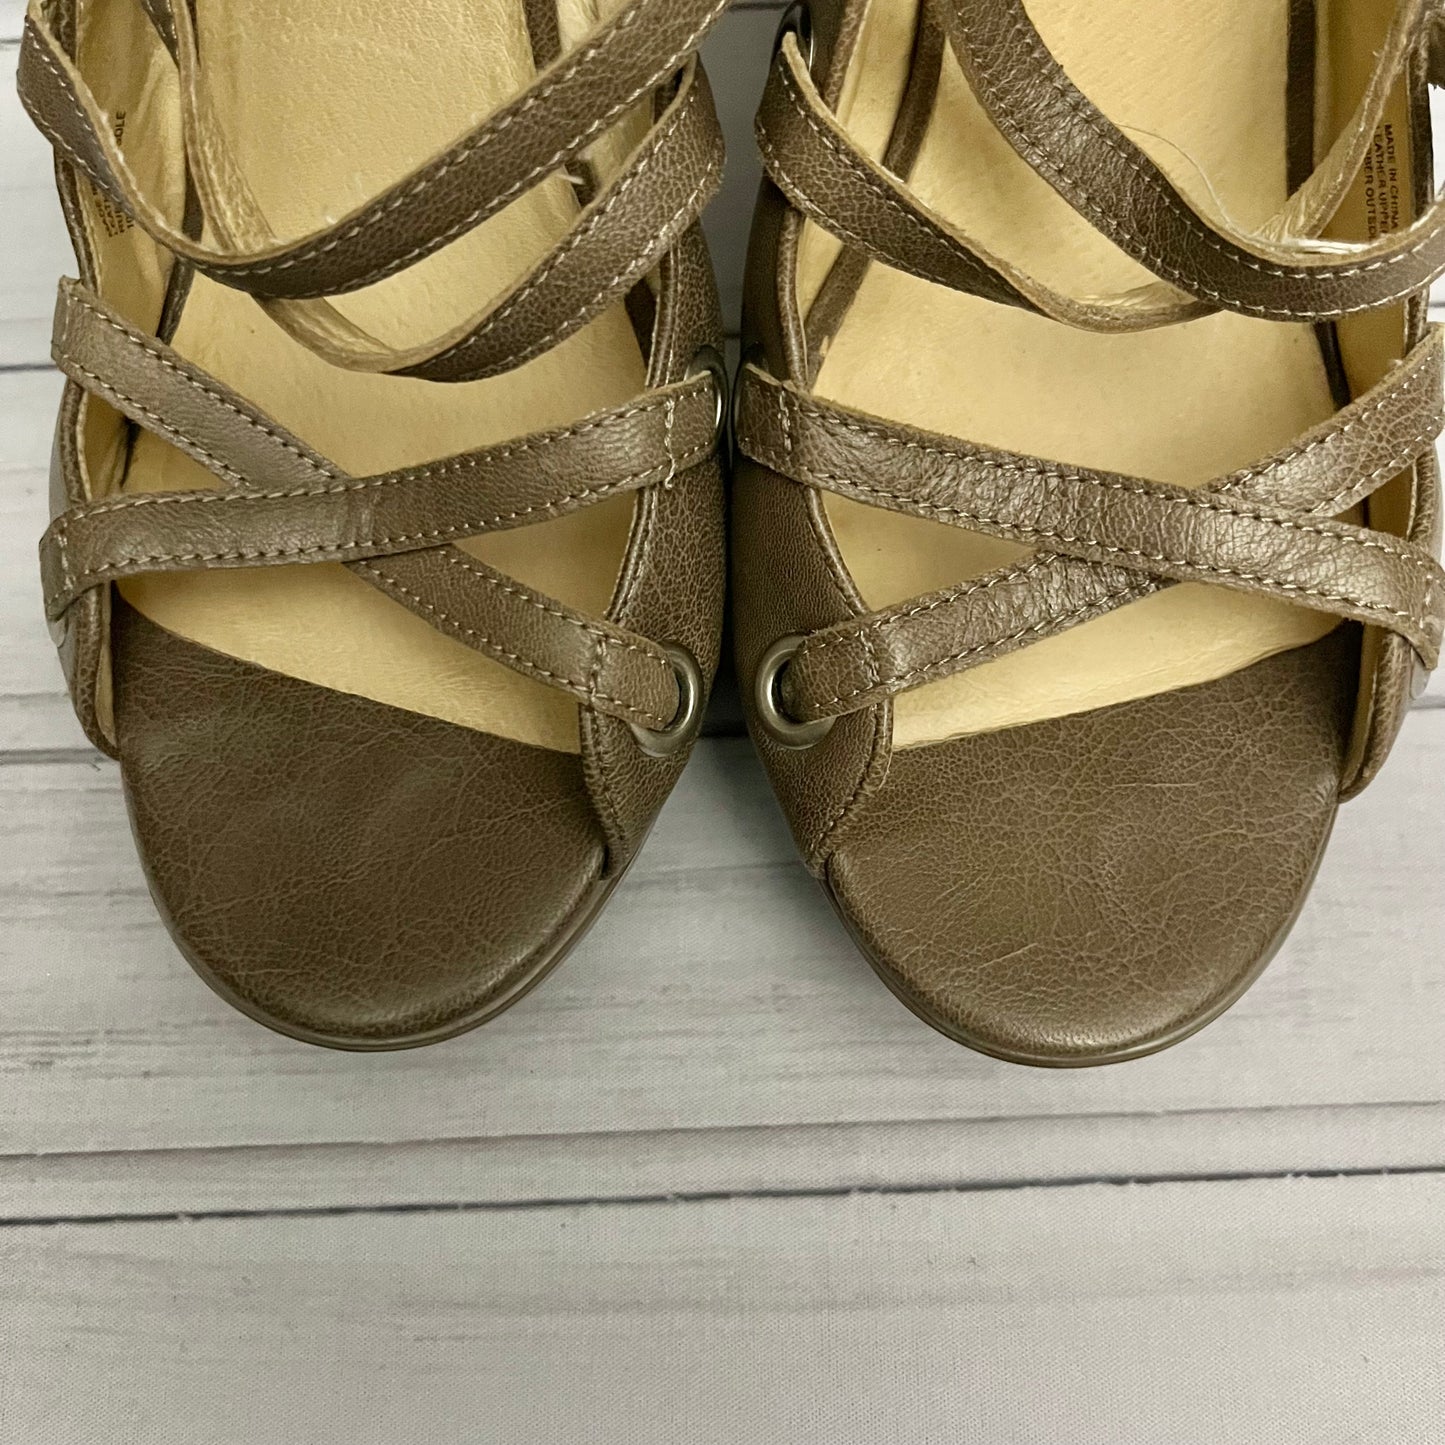 Sandals Heels Block By Michael By Michael Kors  Size: 10